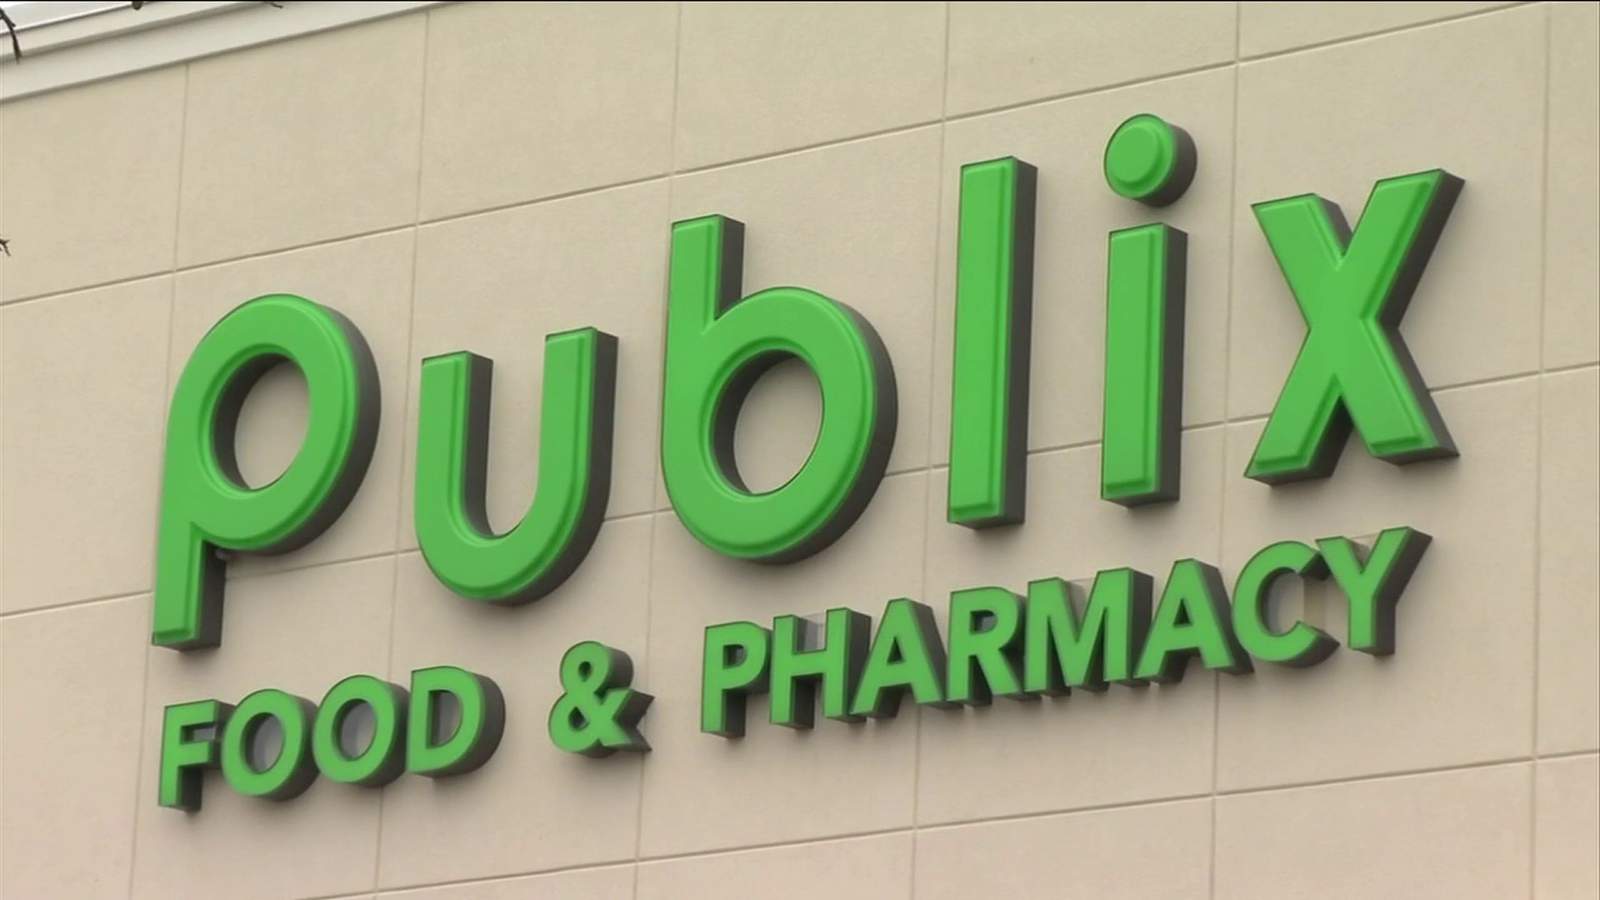 Publix shifts Moderna vaccine scheduling to Fridays